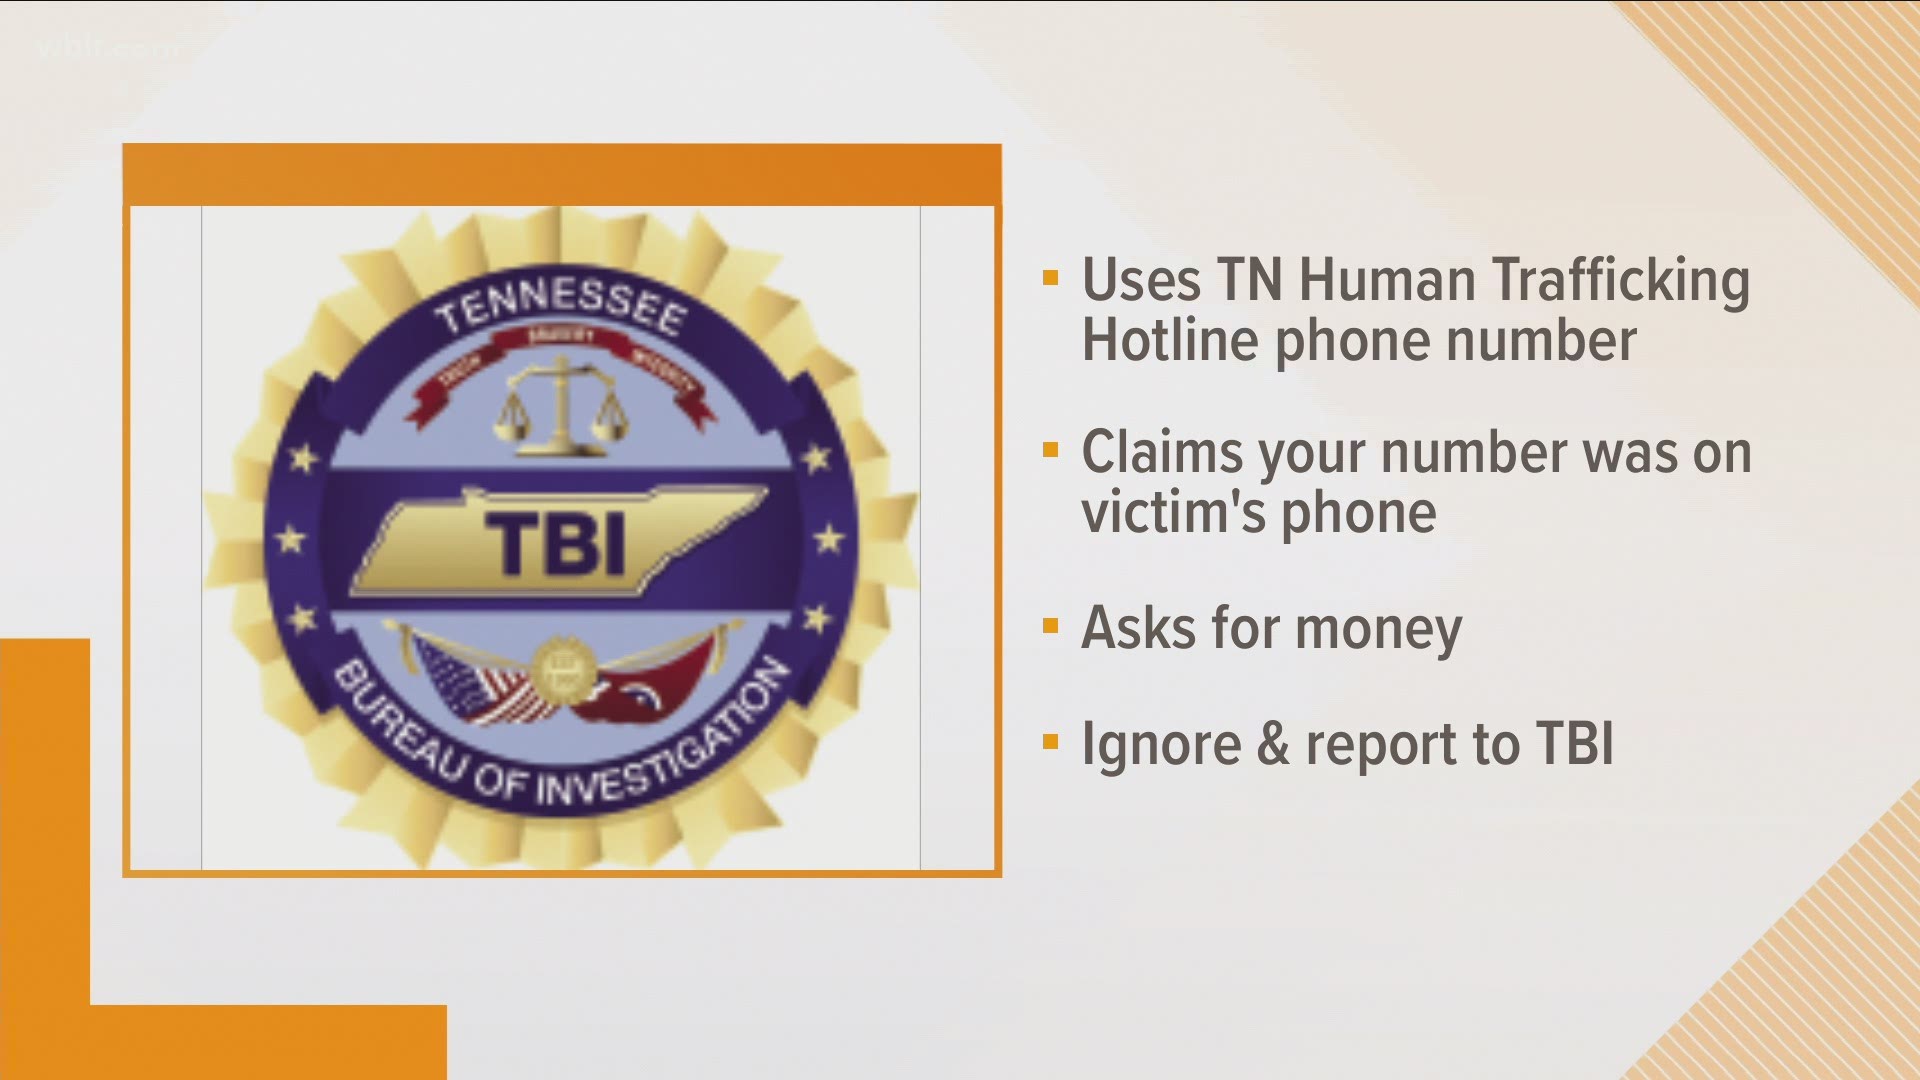 Anyone who receives a similar phone call should ignore the caller’s message and report it to the TBI at 1-800-TBI-FIND or online.